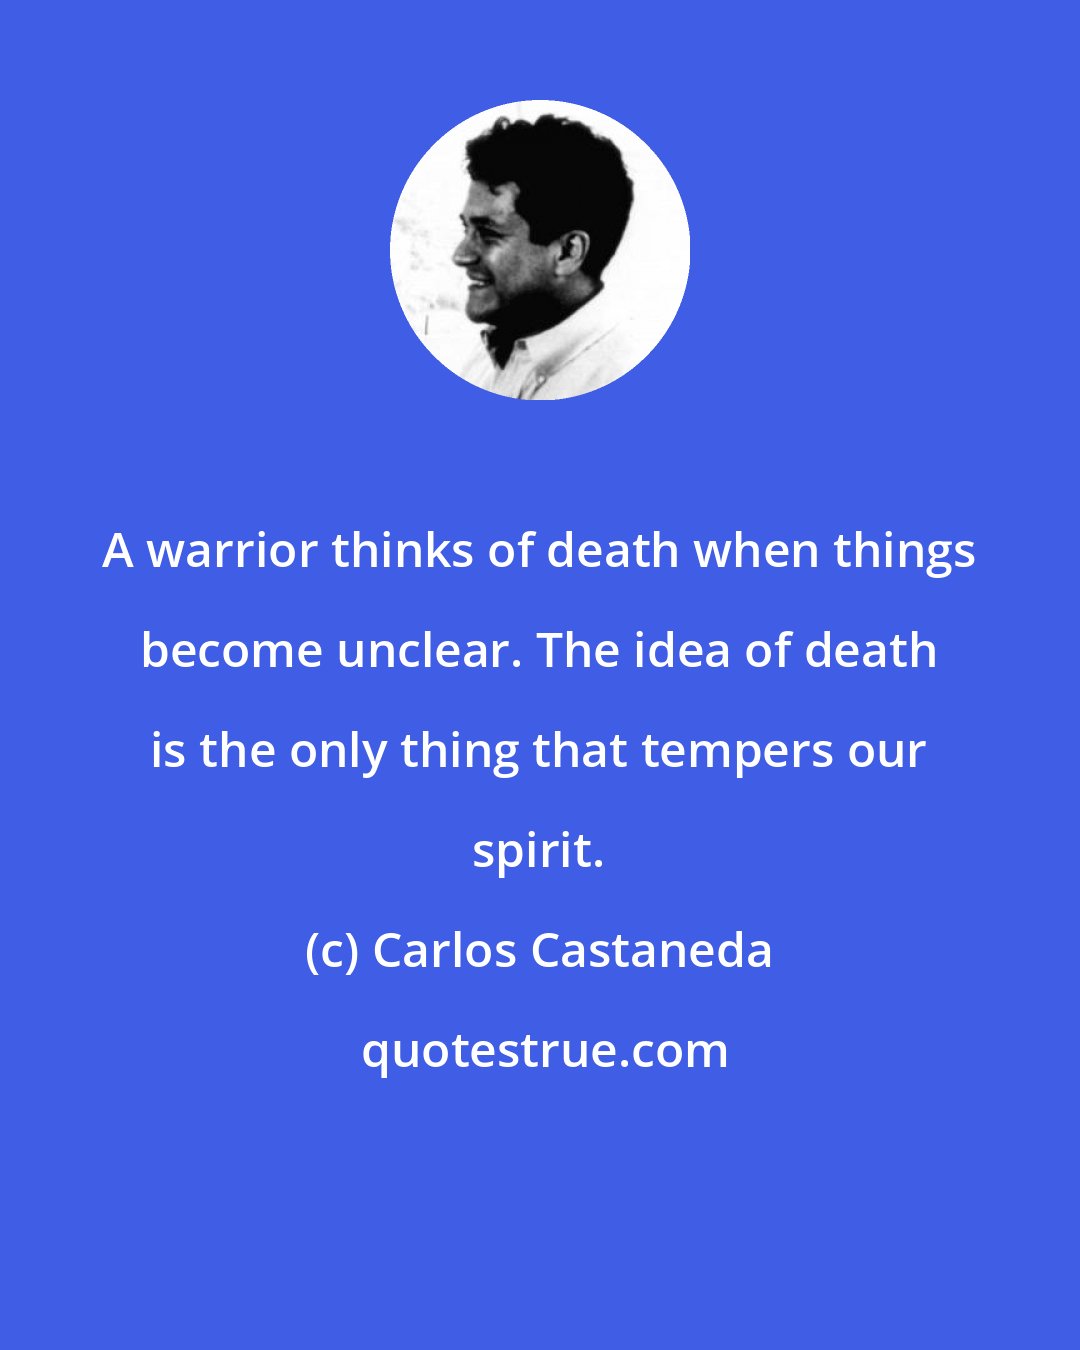 Carlos Castaneda: A warrior thinks of death when things become unclear. The idea of death is the only thing that tempers our spirit.